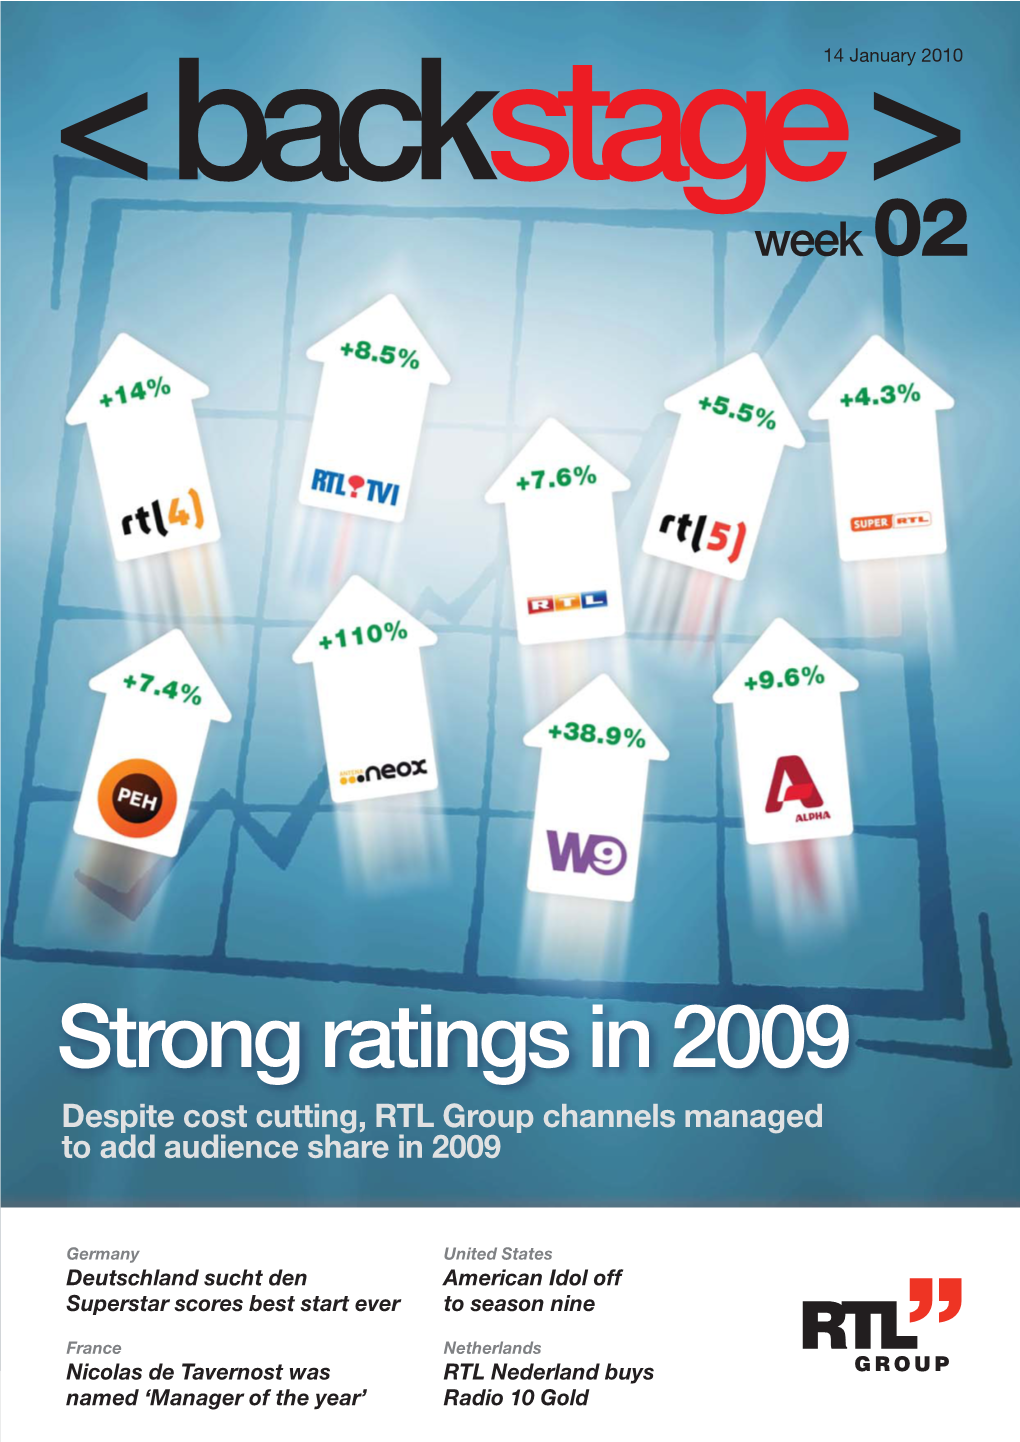 Strong Ratings in 2009 Despite Cost Cutting, RTL Group Channels Managed to Add Audience Share in 2009